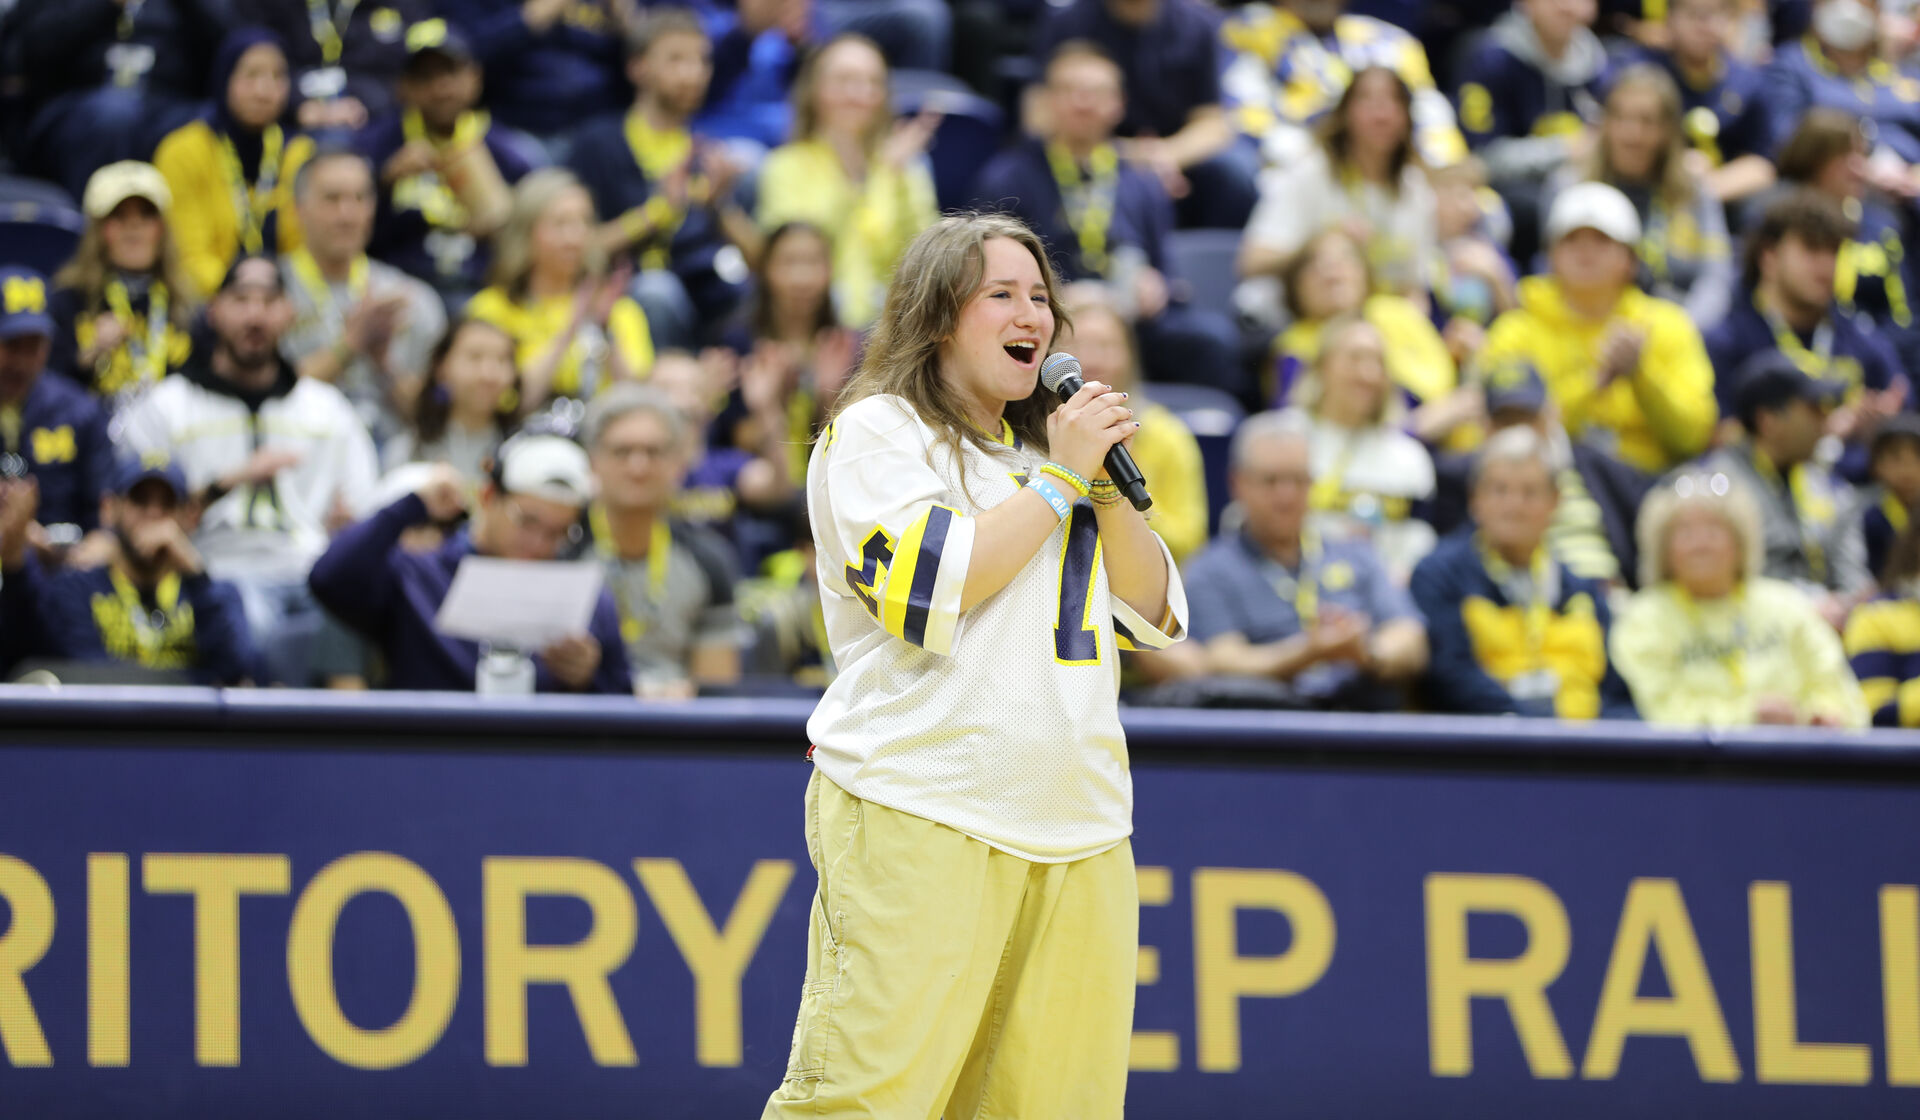 Daisy Sklar, in a white U-M jersey and khaki pants, speaks into a microphone with a maize and blue crowd behind her.